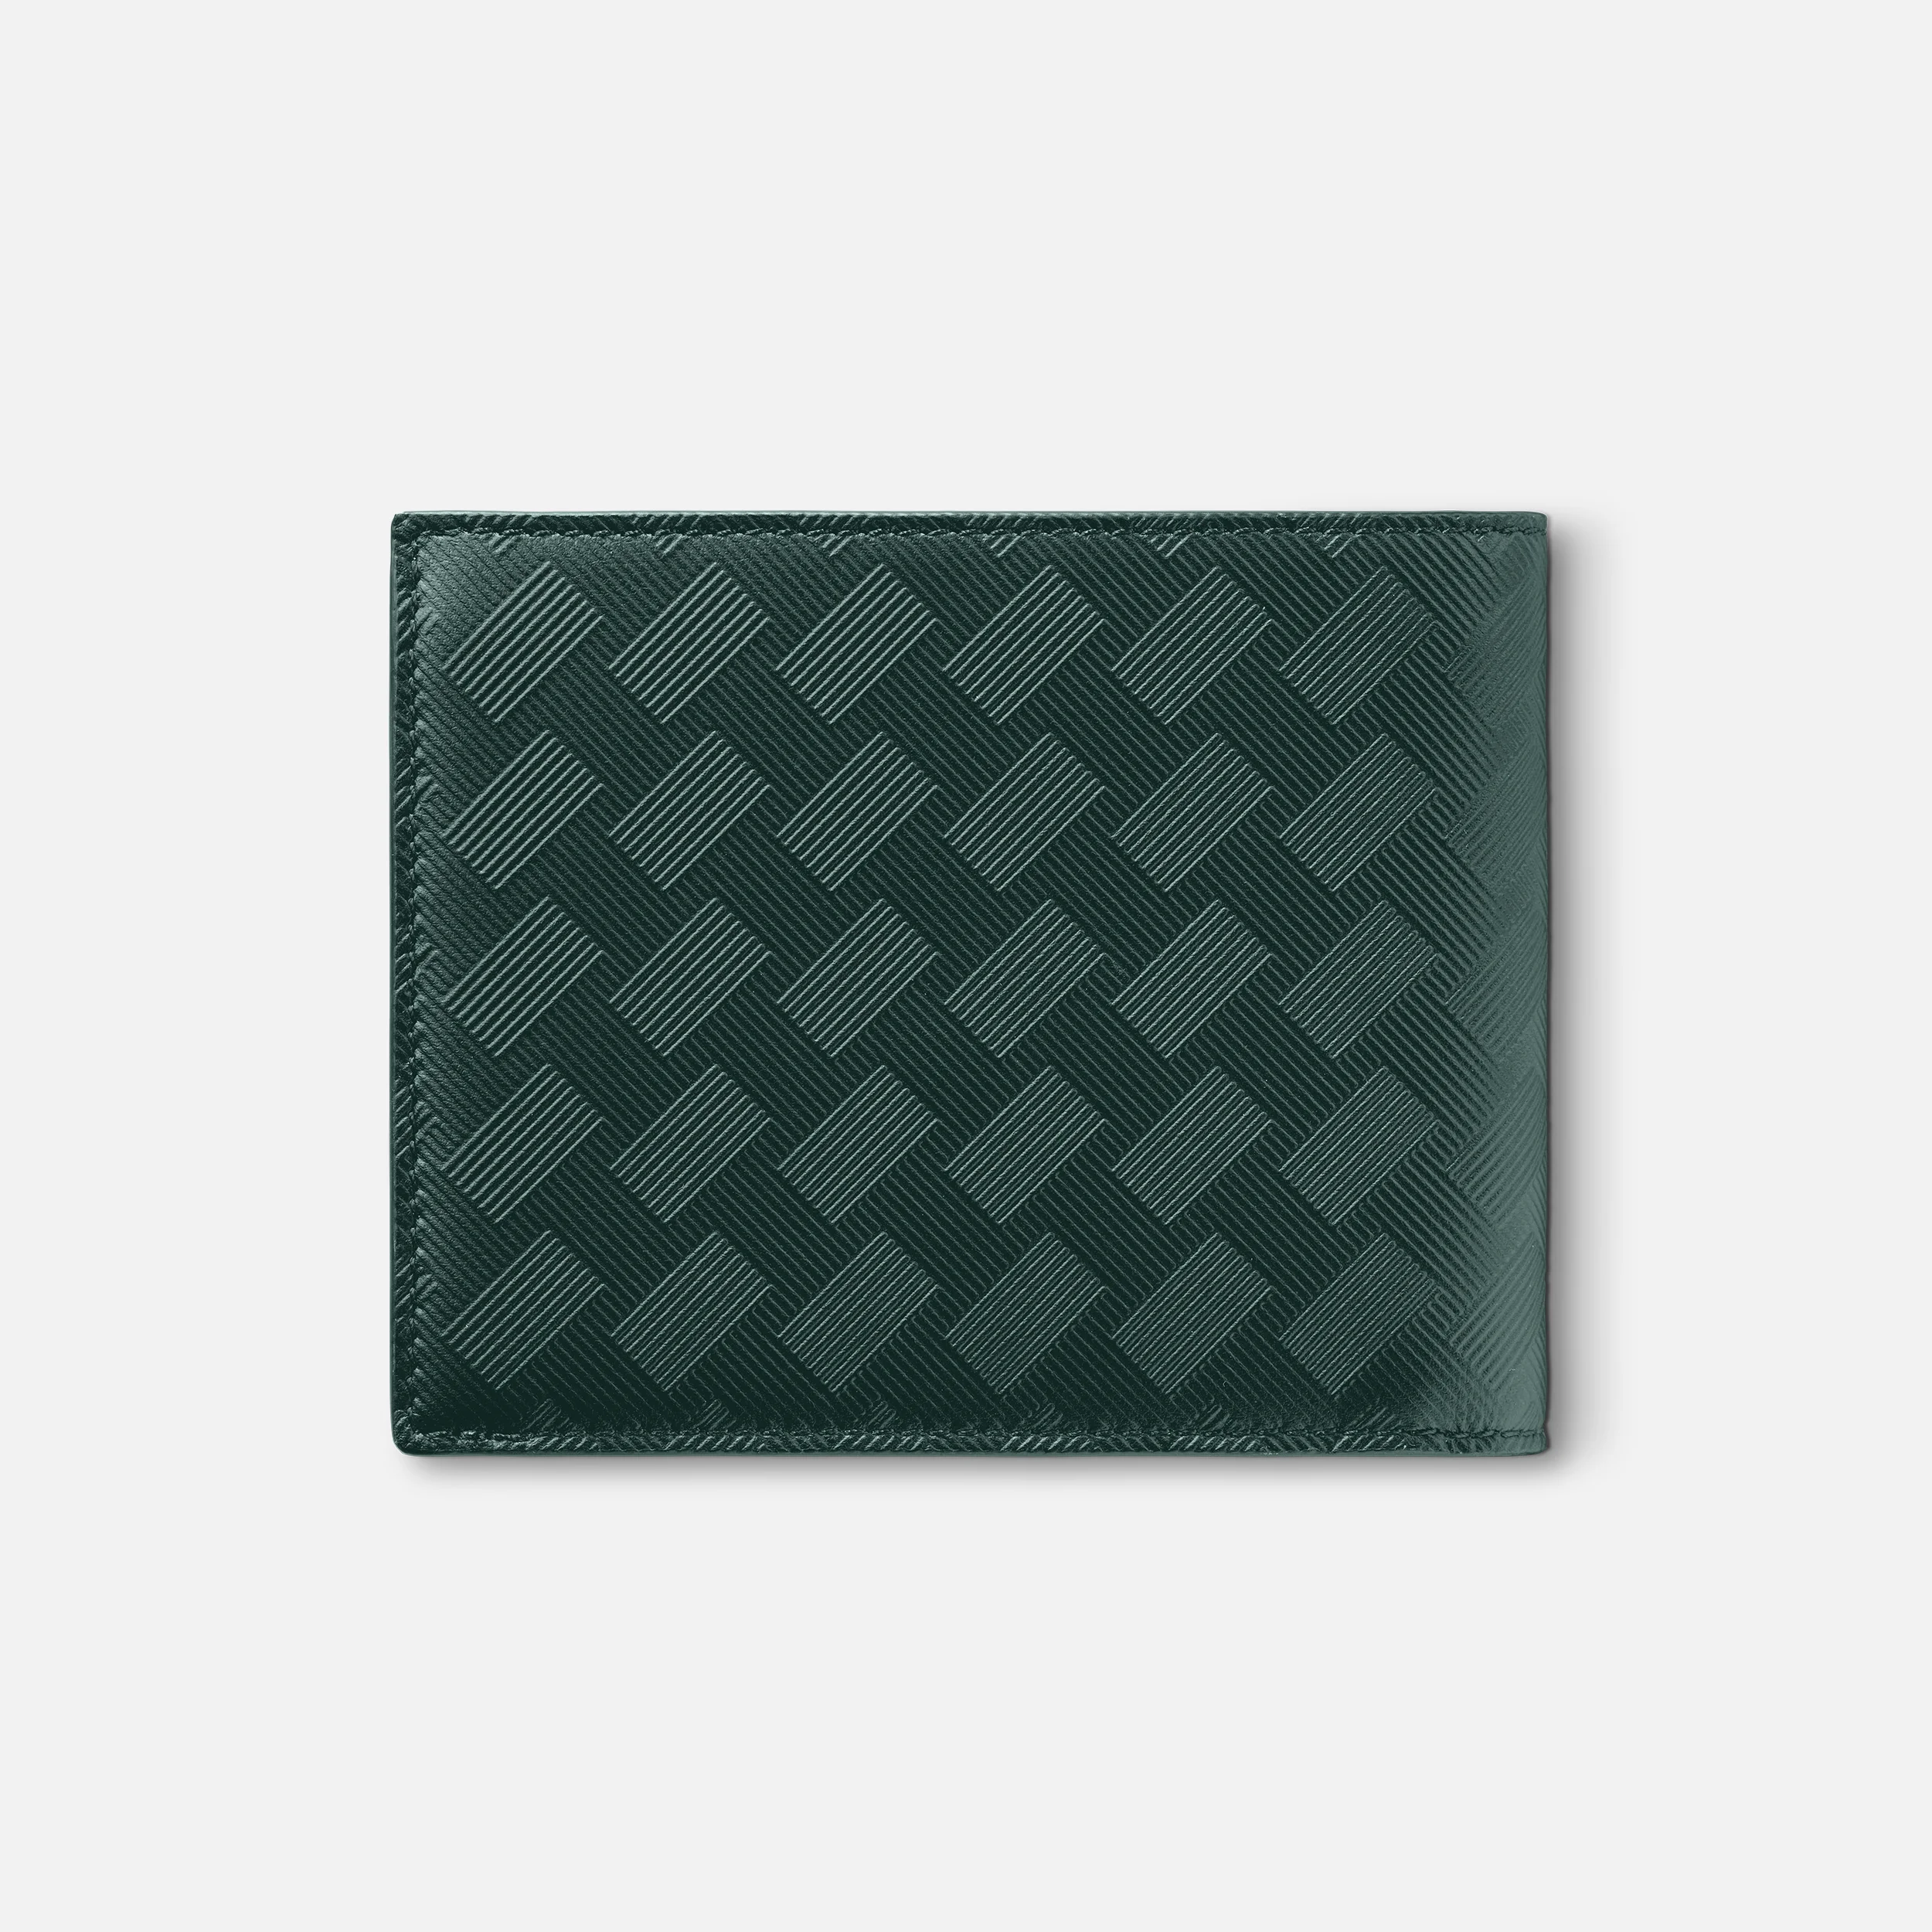 Montblanc Extreme 3.0 Wallet 6CC British Green - Pencraft the boutique